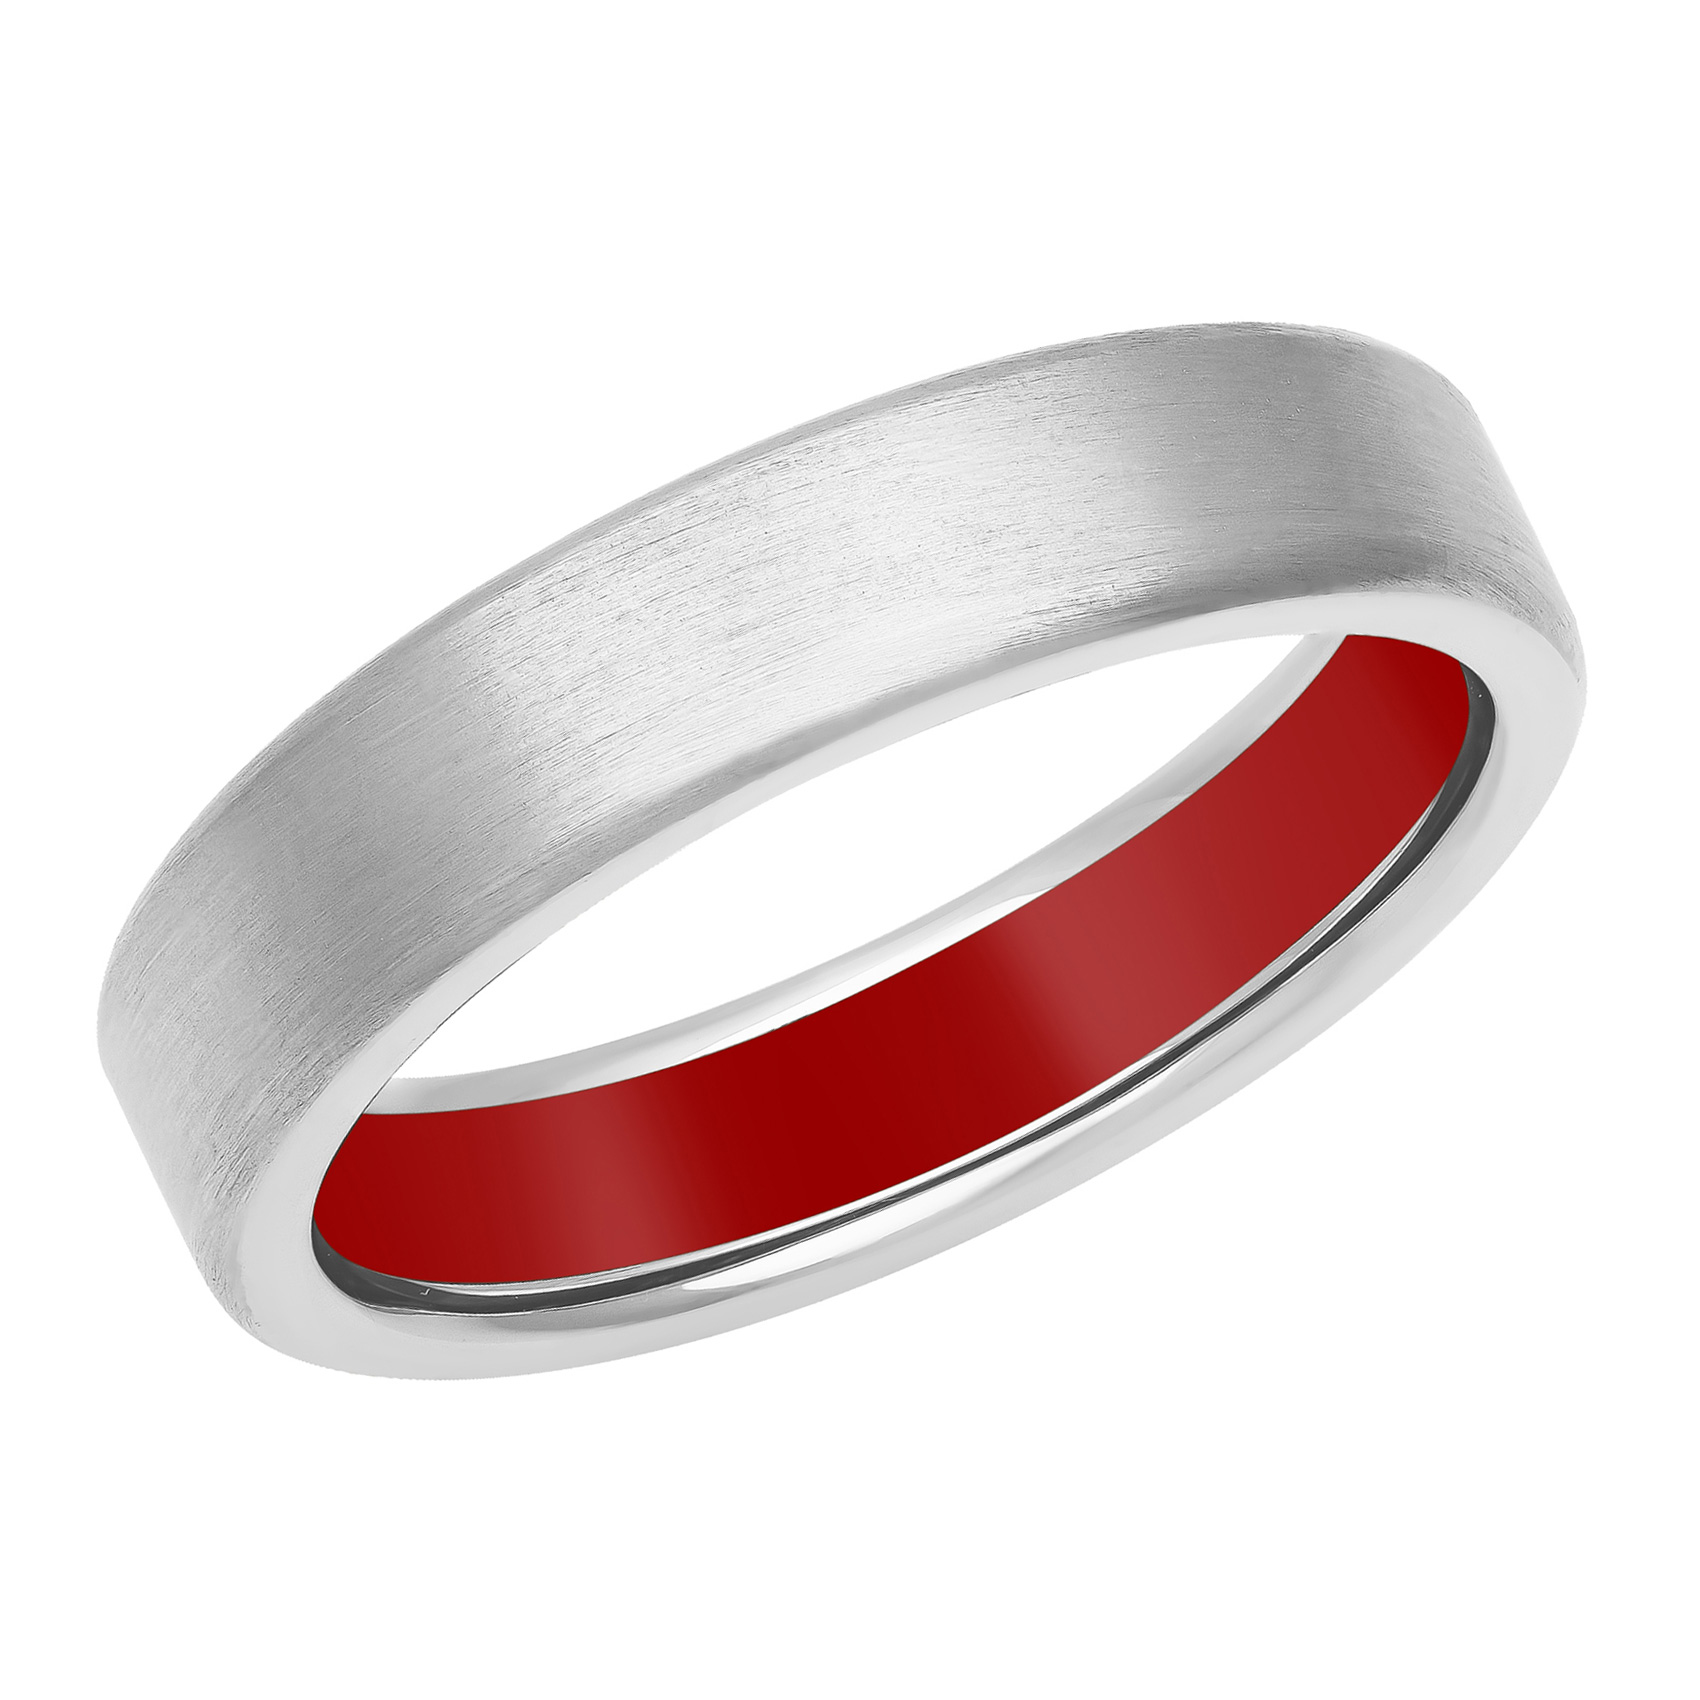 White Gold with Red Ceramic Interior Wedding Band | 5mm | Men's | Size 9.5